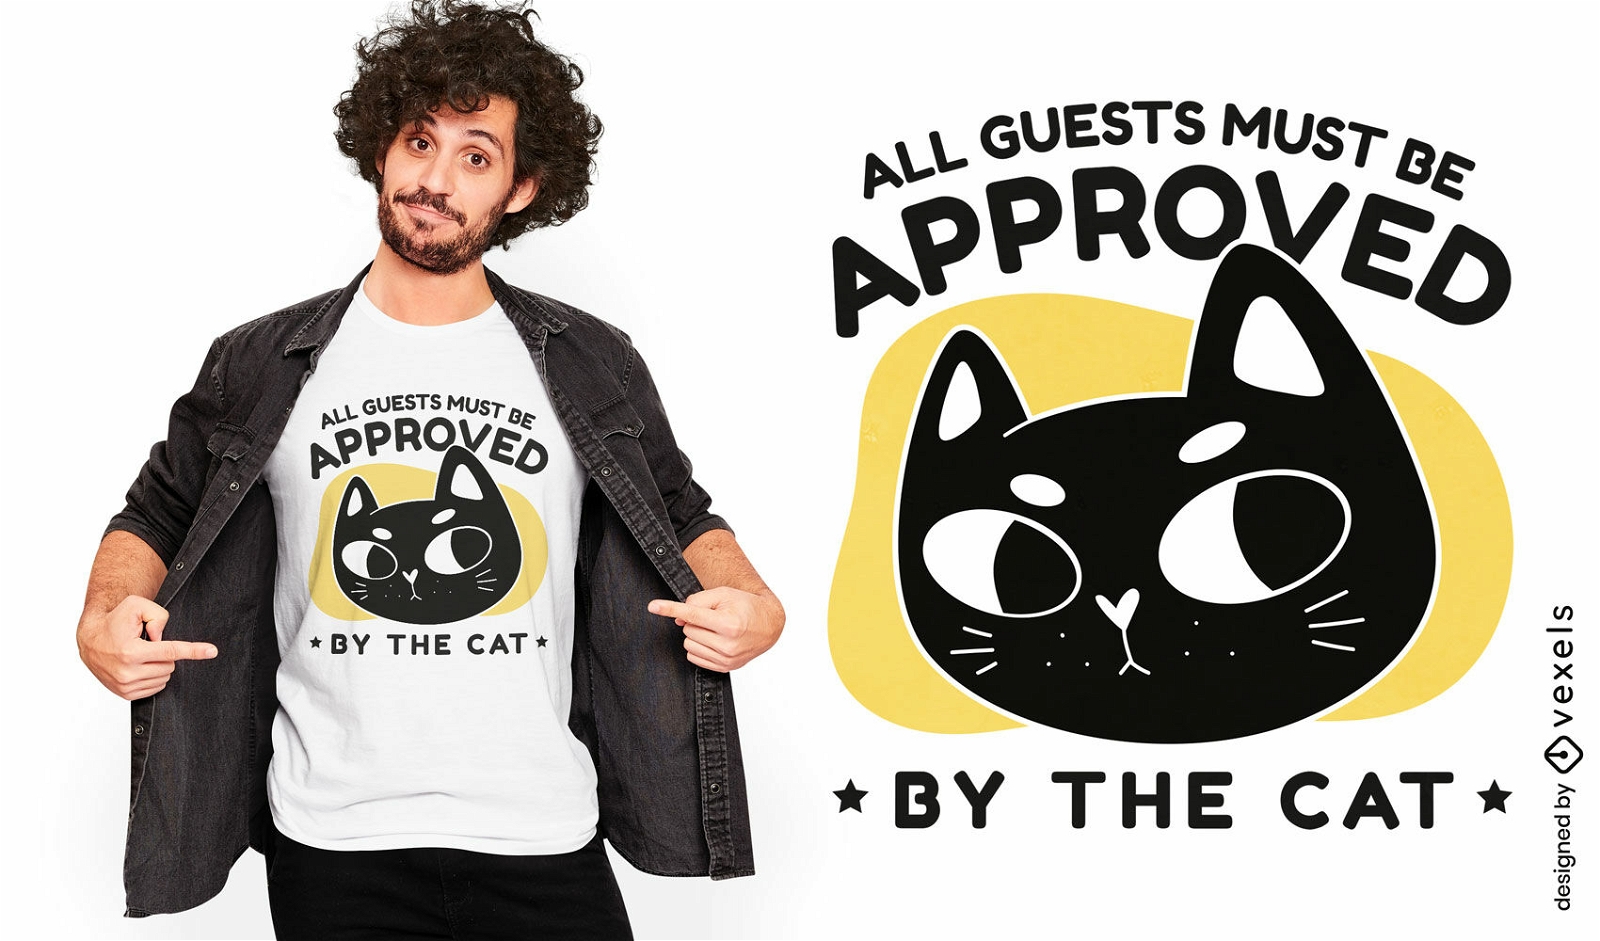 Approved by the cat funny t-shirt design